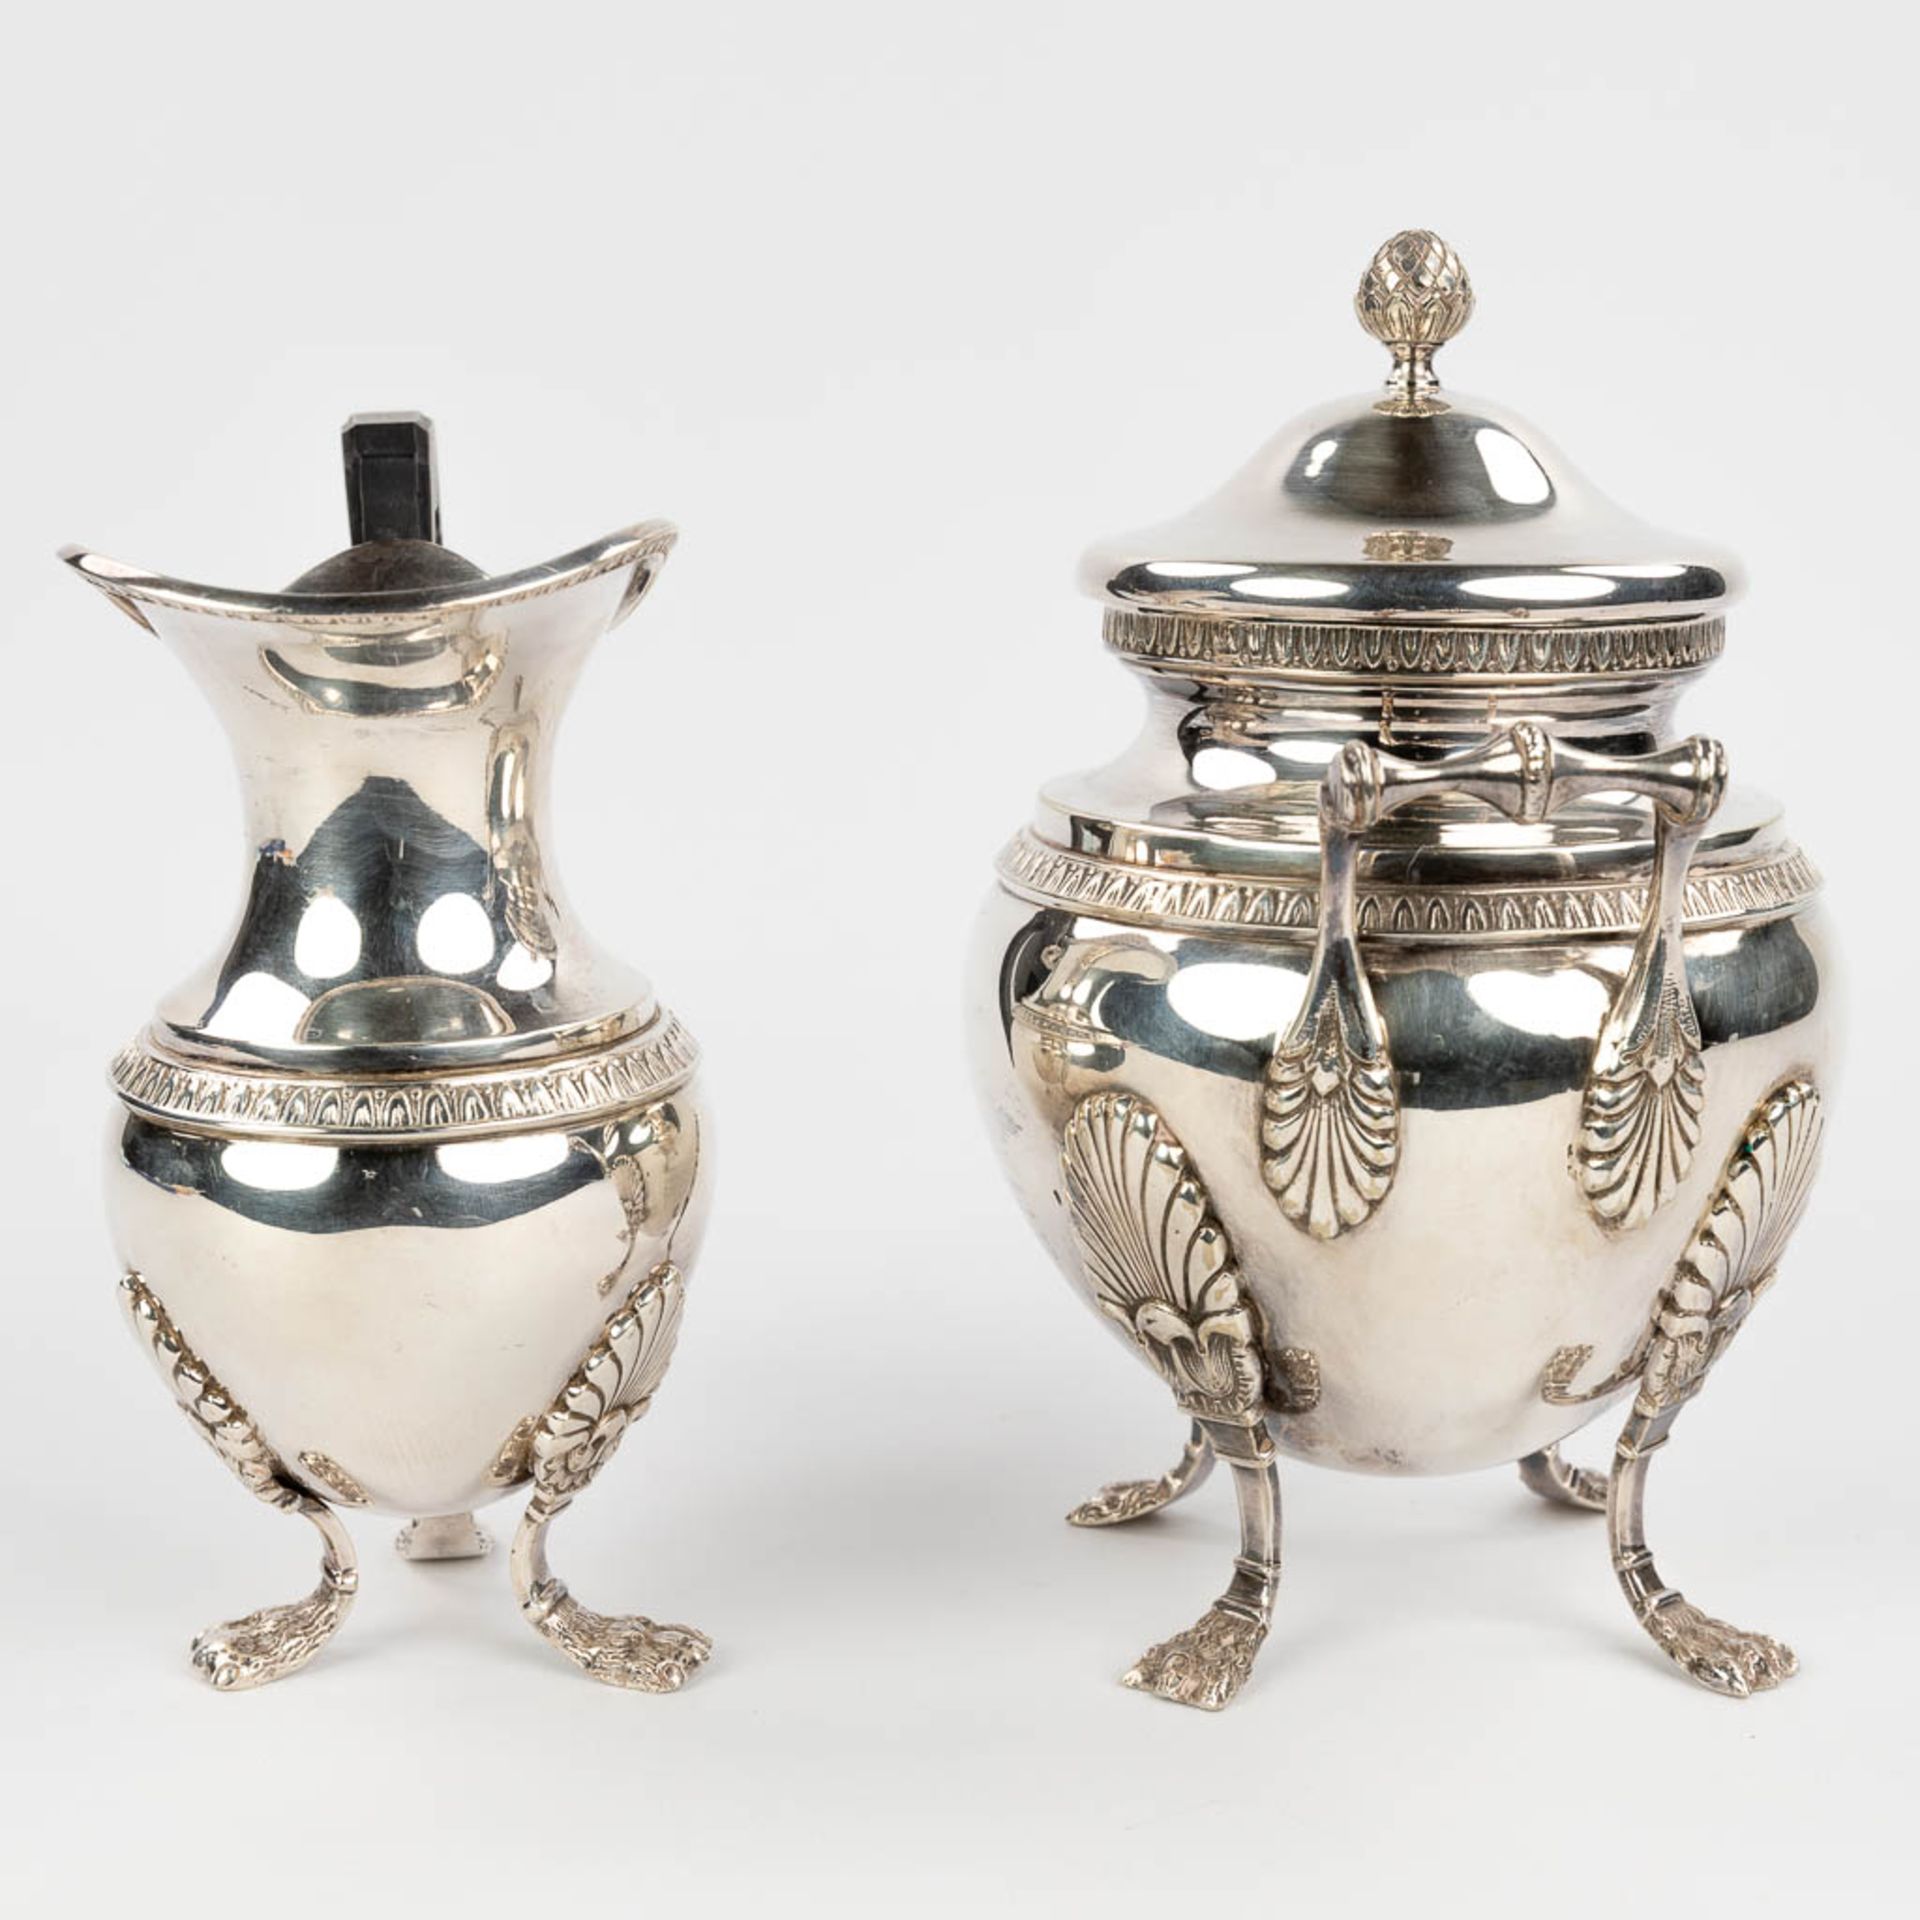 Mills Van Den Torren, a coffee and tea service made of silver-plated metal. (14,5 x 24 x 31cm) - Image 16 of 21